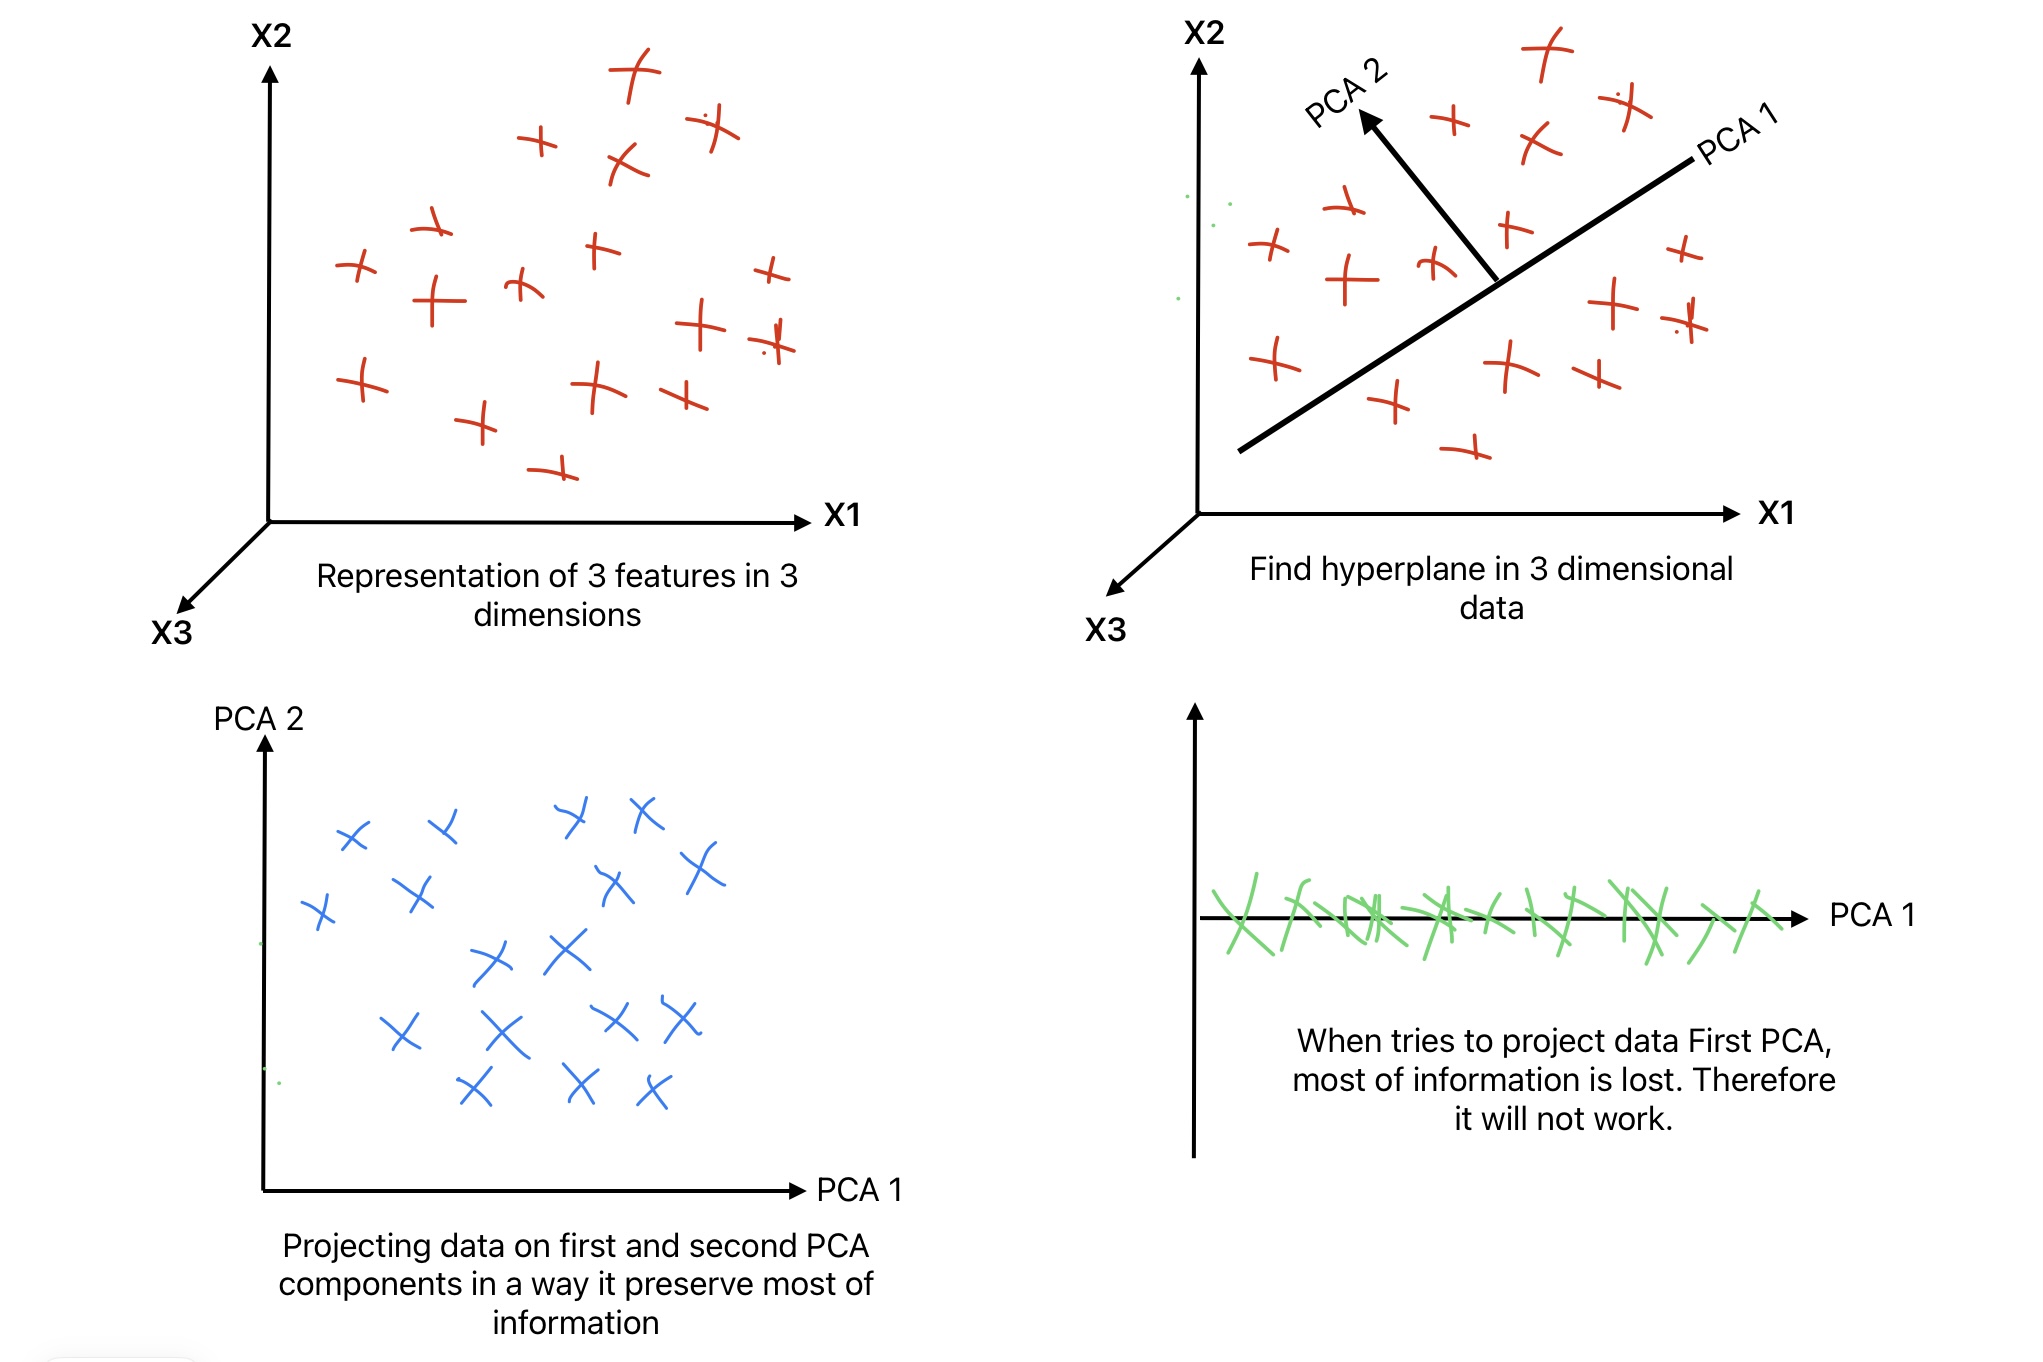 This image shows the Steps in Principal Component Analysis